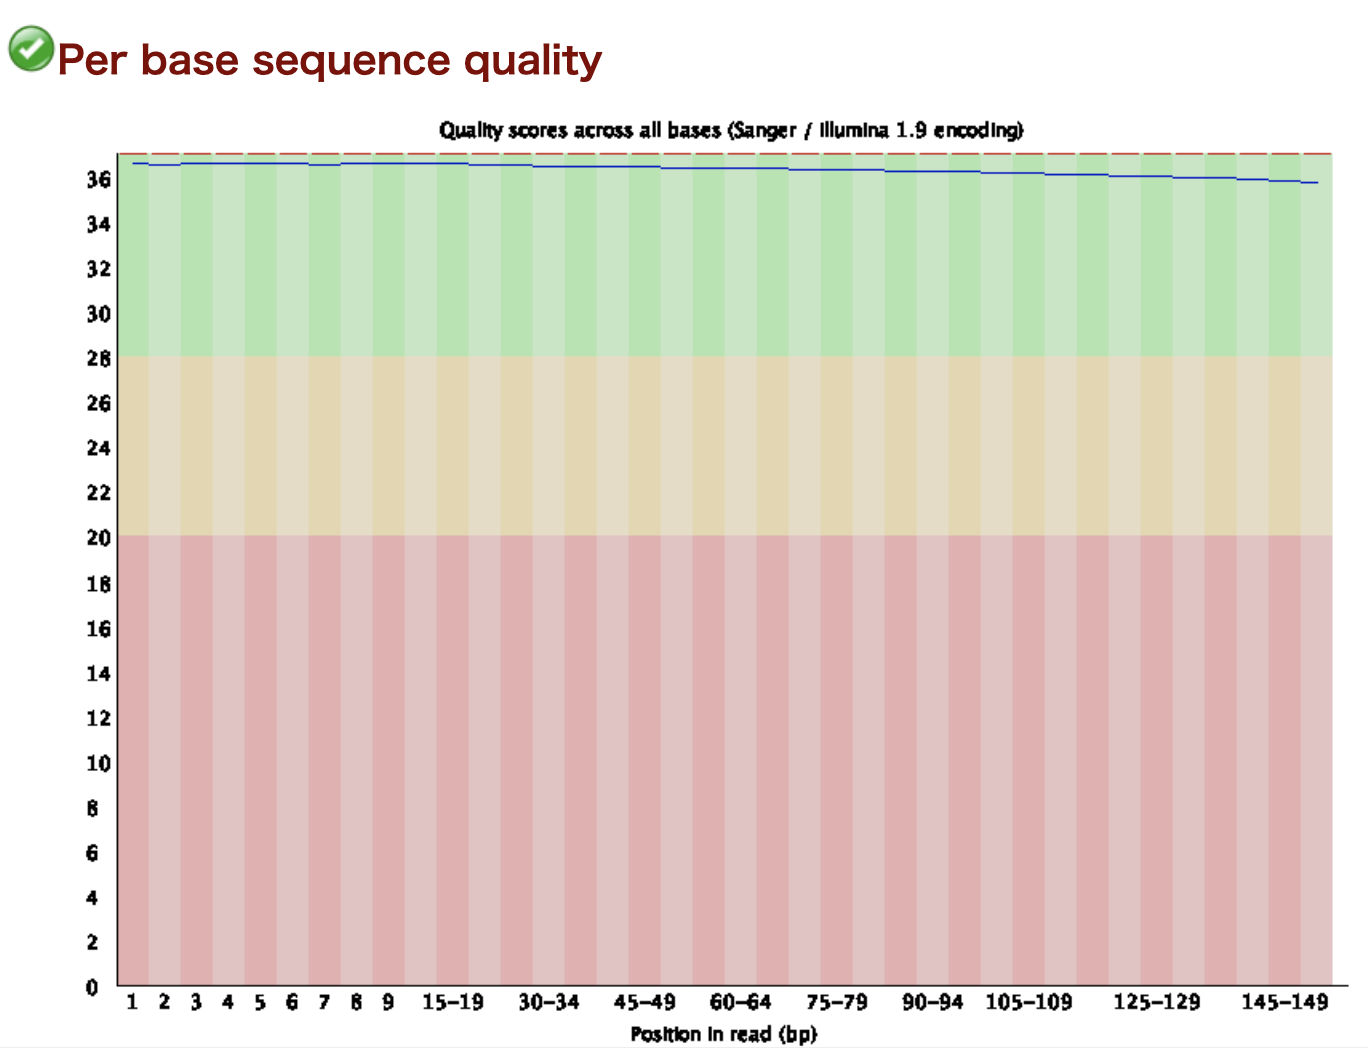 Per base sequence quality